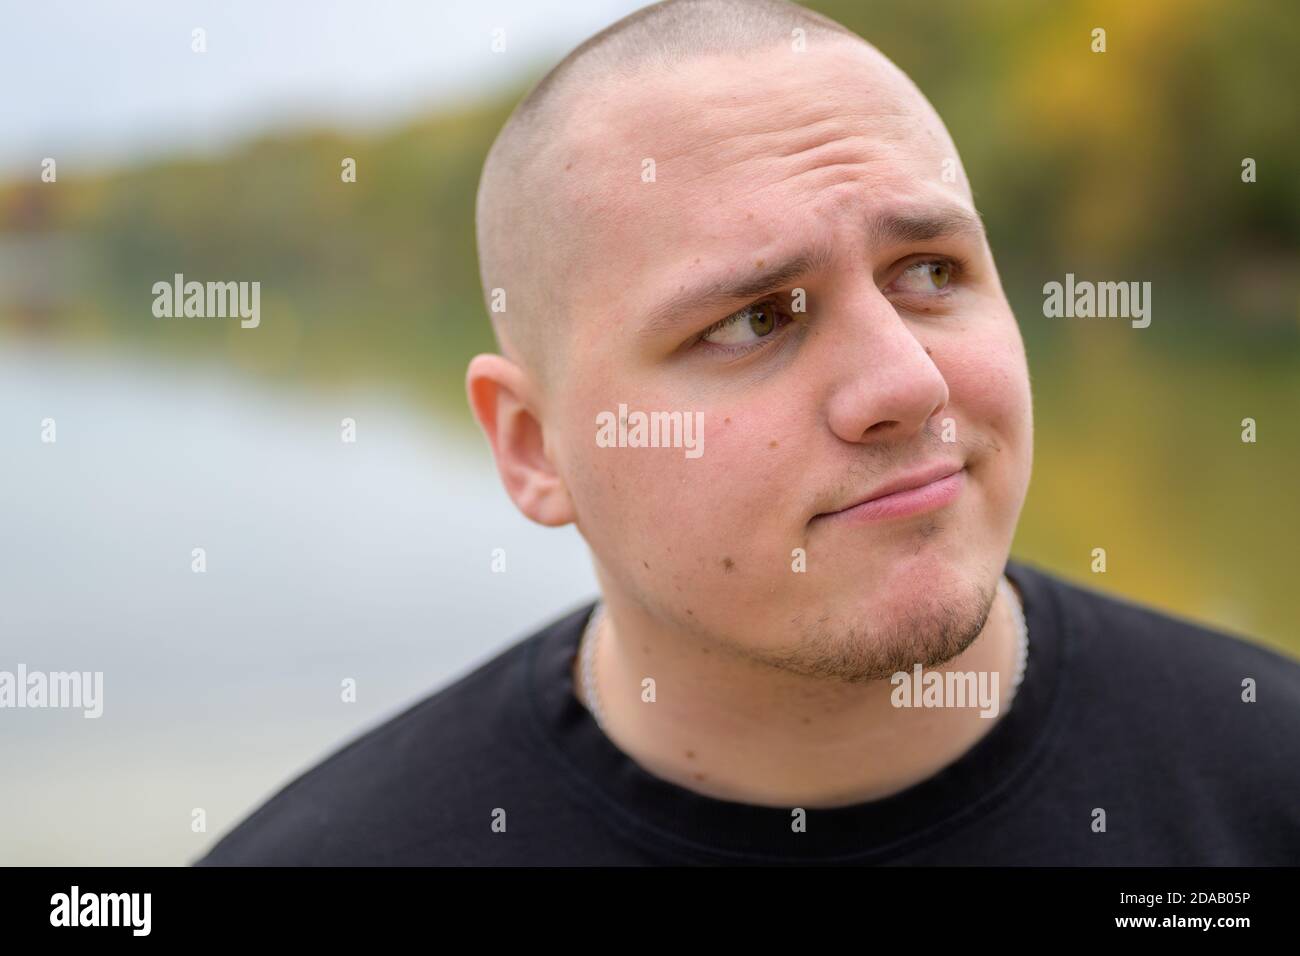 Dubious or confused young man frowning and pursing his lips as he looks up to the side outdoors at an autumn lake in a park Stock Photo